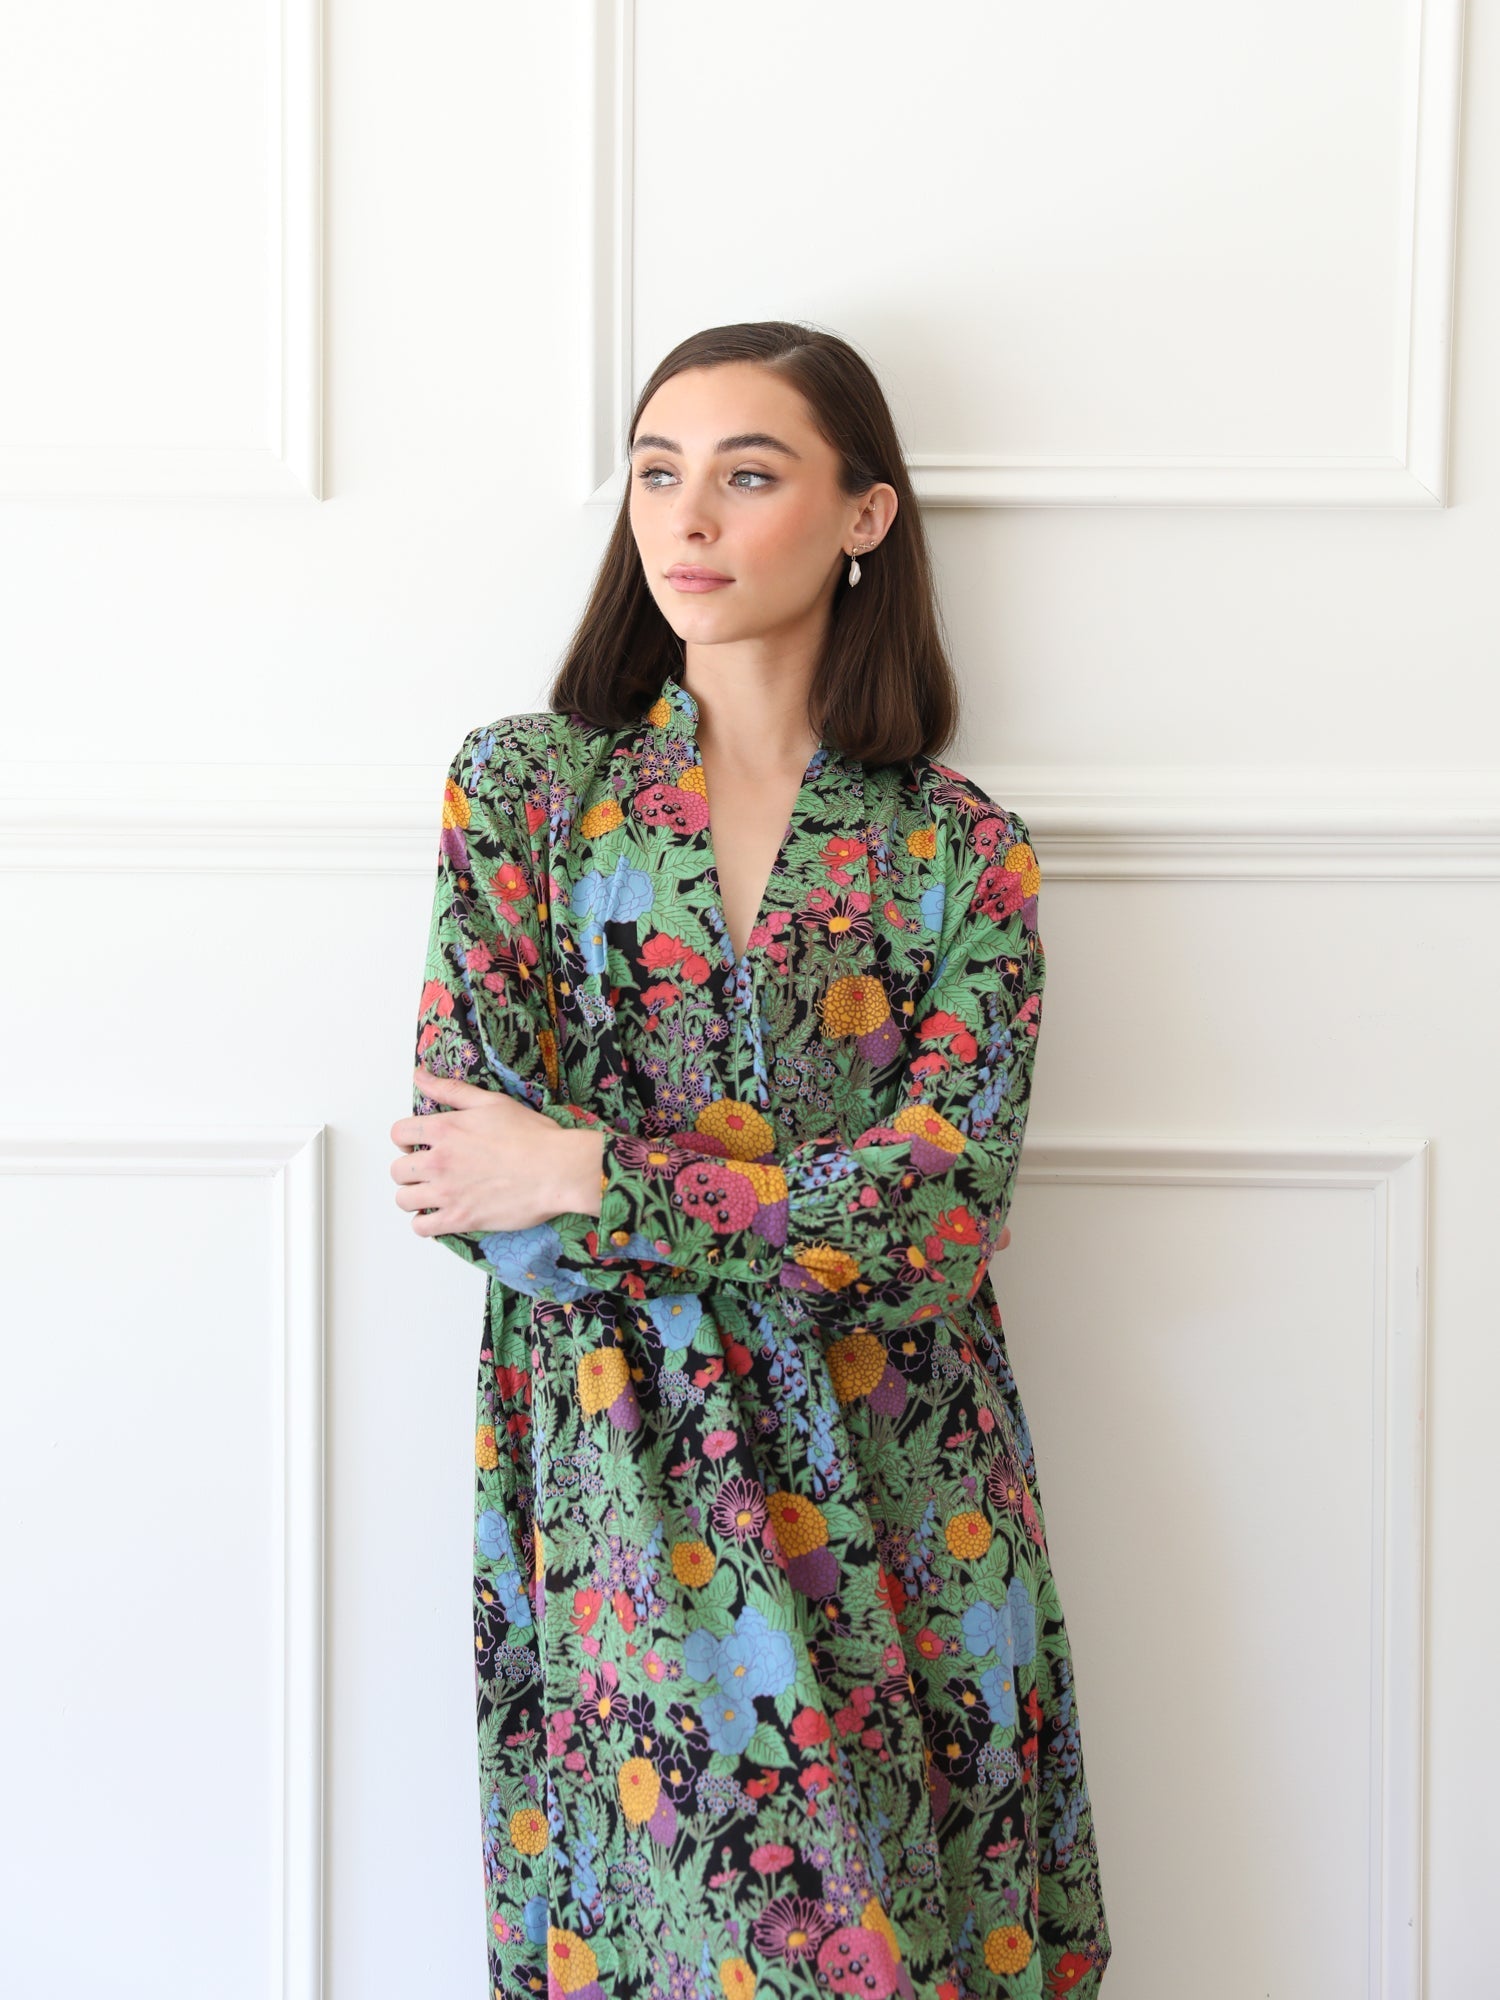 MILLE Clothing Esther Dress in Botanica